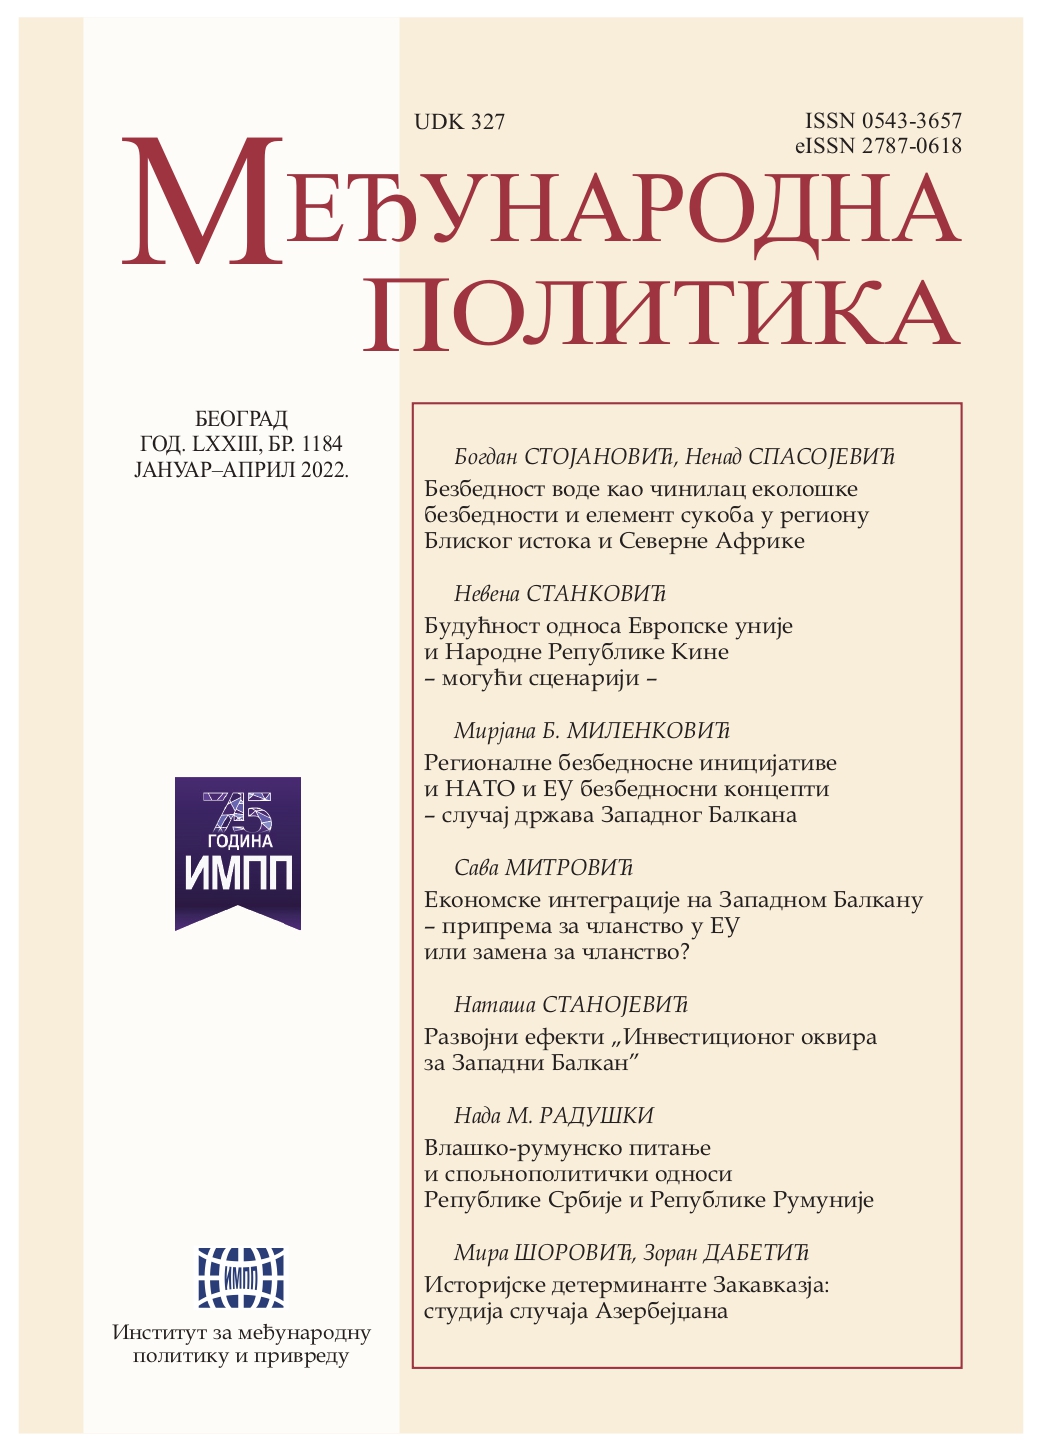 Economic integration in the Western balkans – preparation for EU membership or replacement for membership? Cover Image